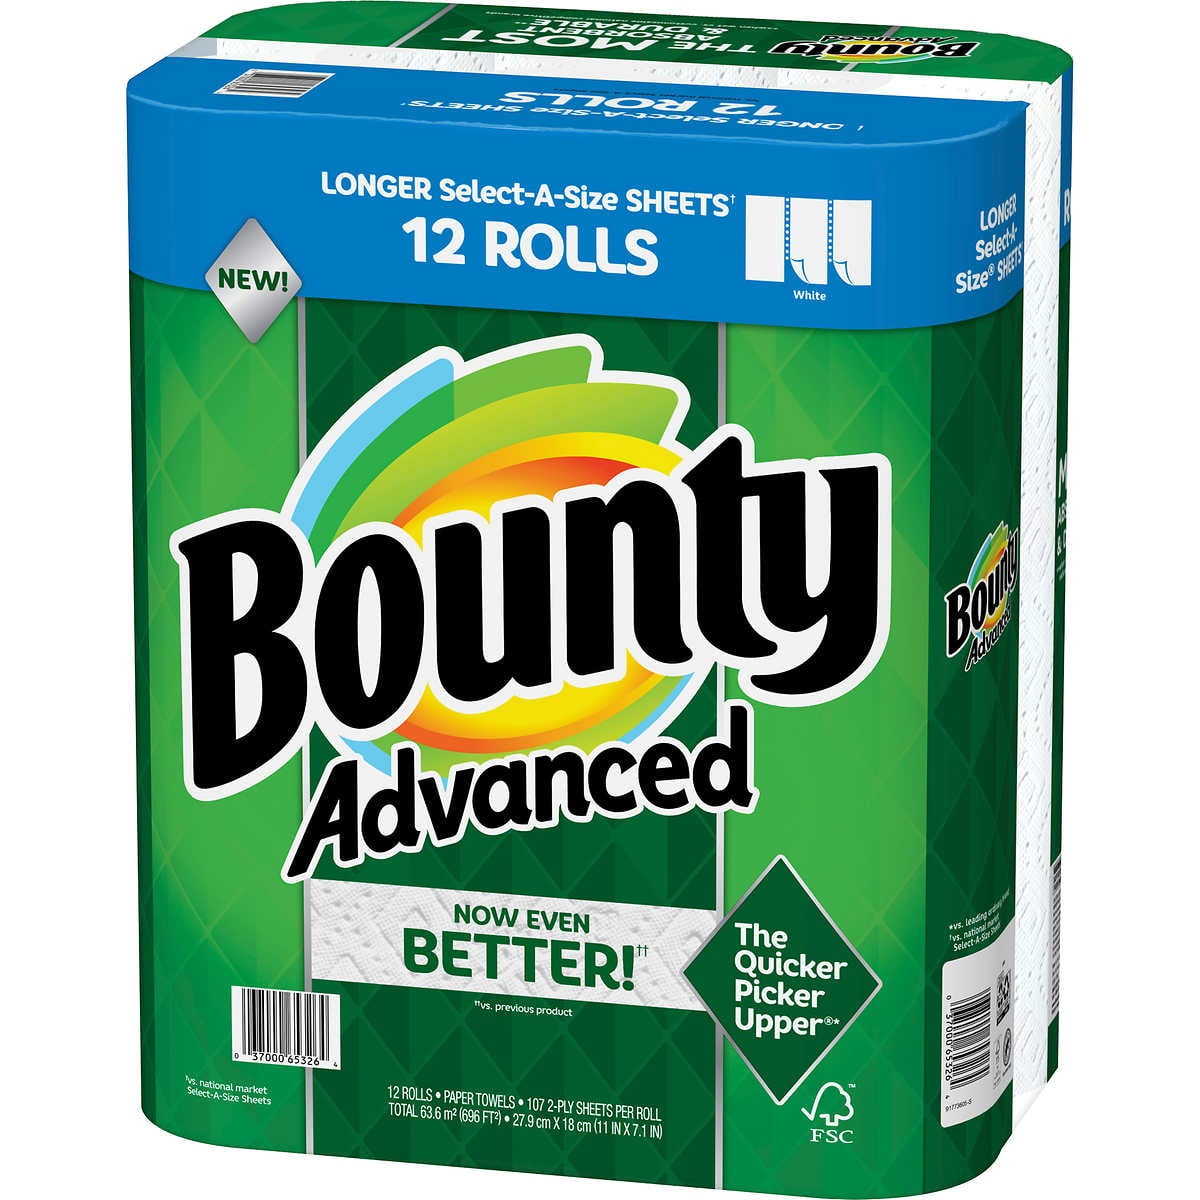 Quick-Size Paper Towels 16 Family Rolls = 40 Regular Rolls 1 Pack